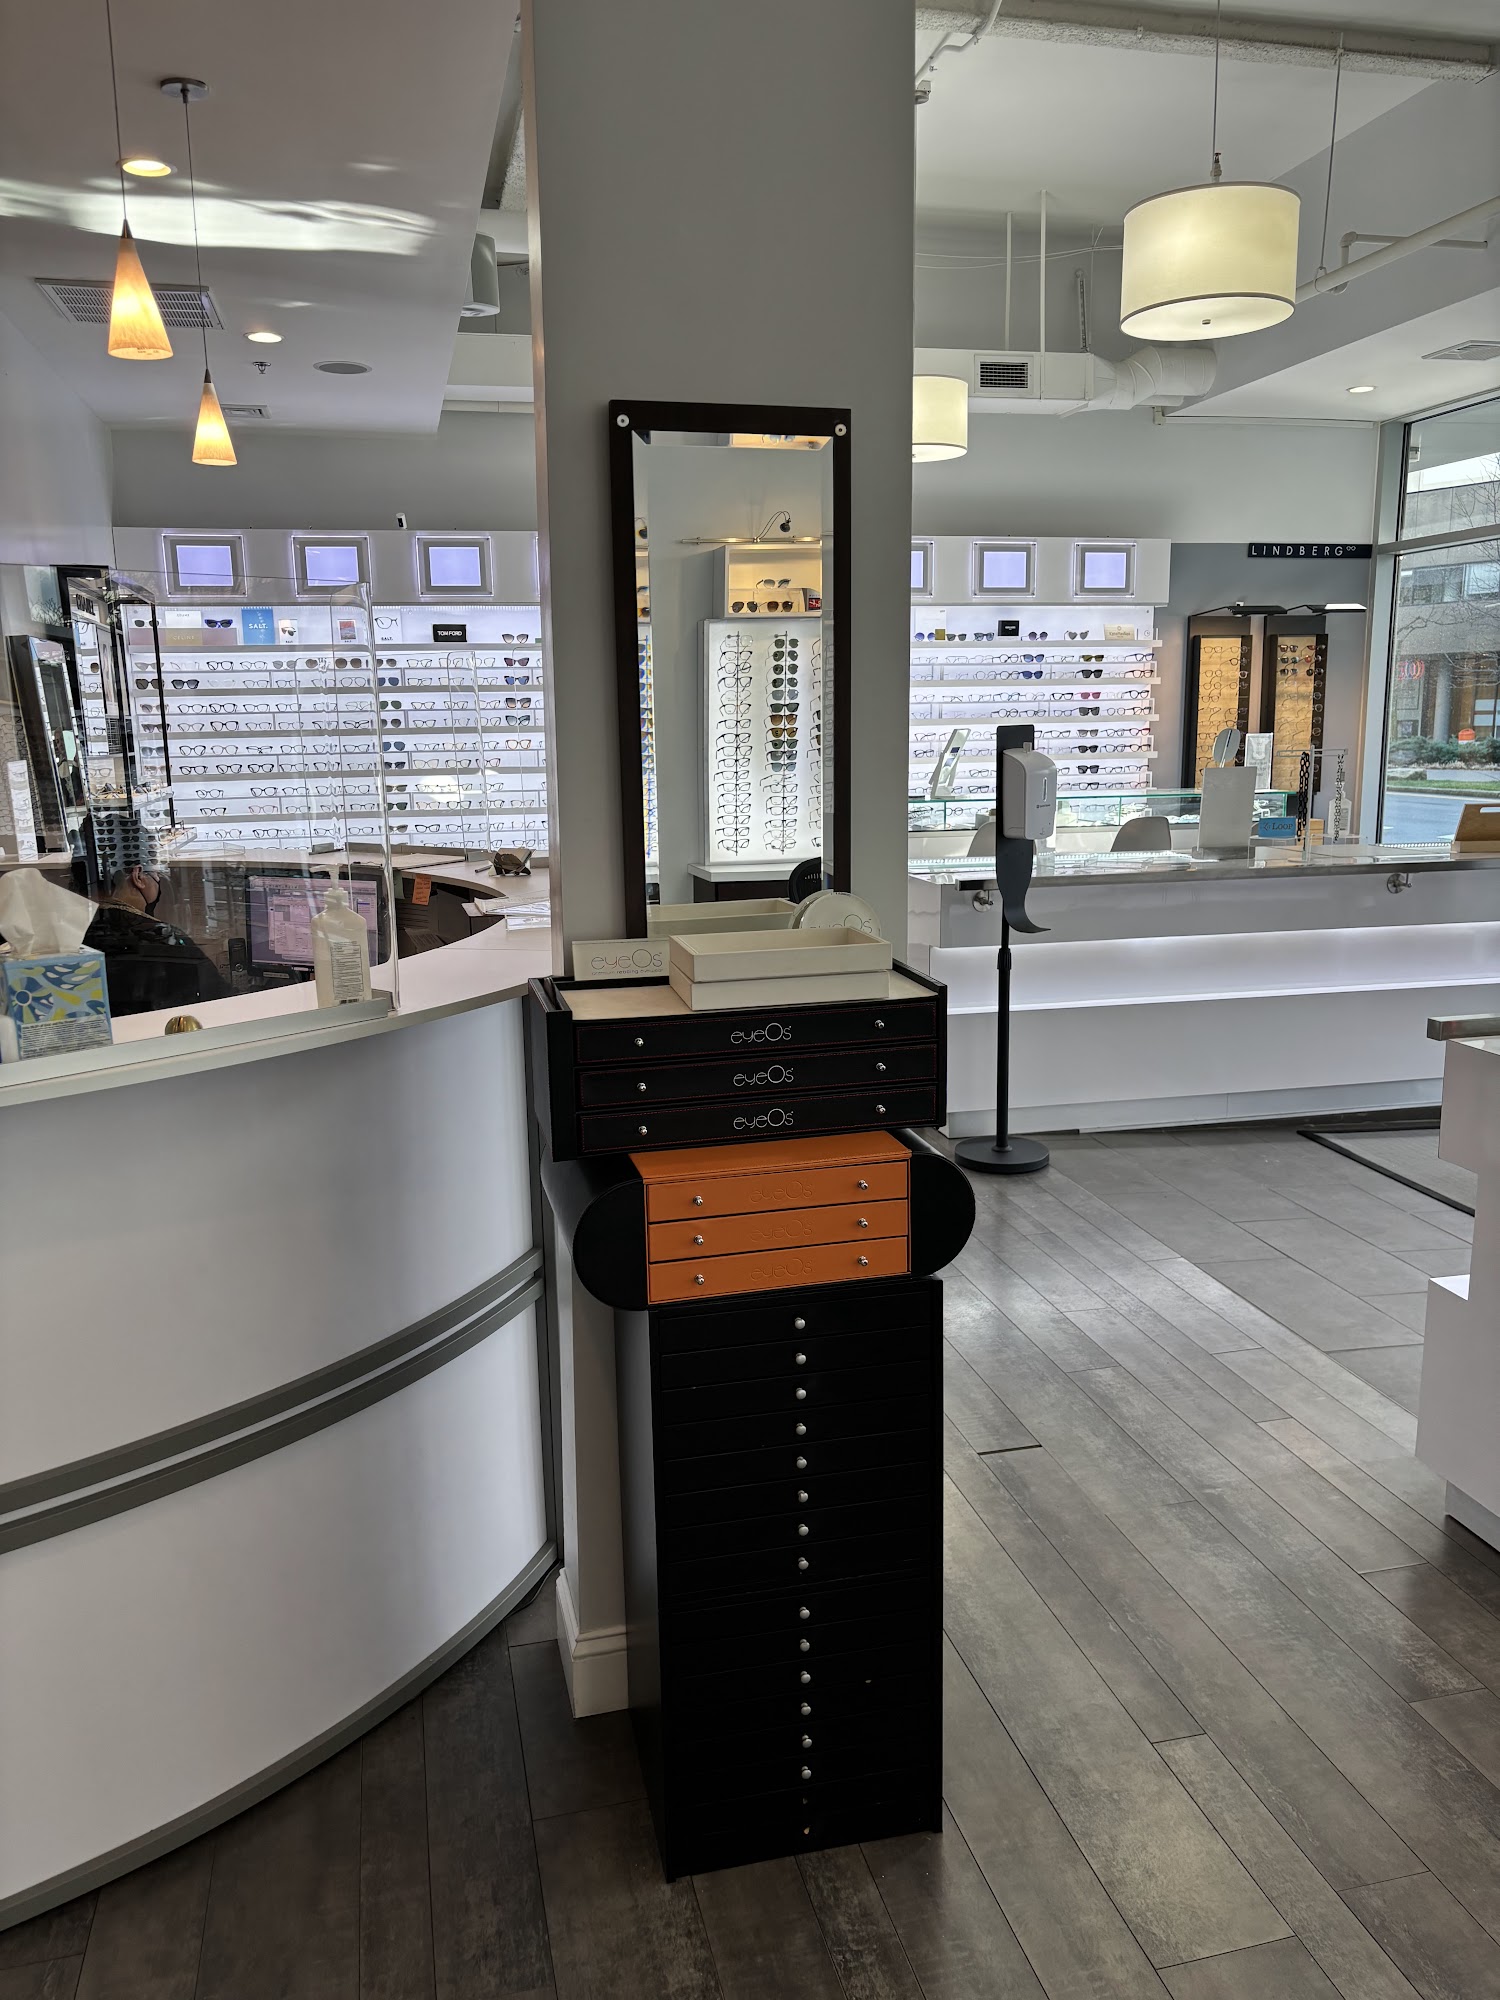 Brattle Square by Market Square Optical